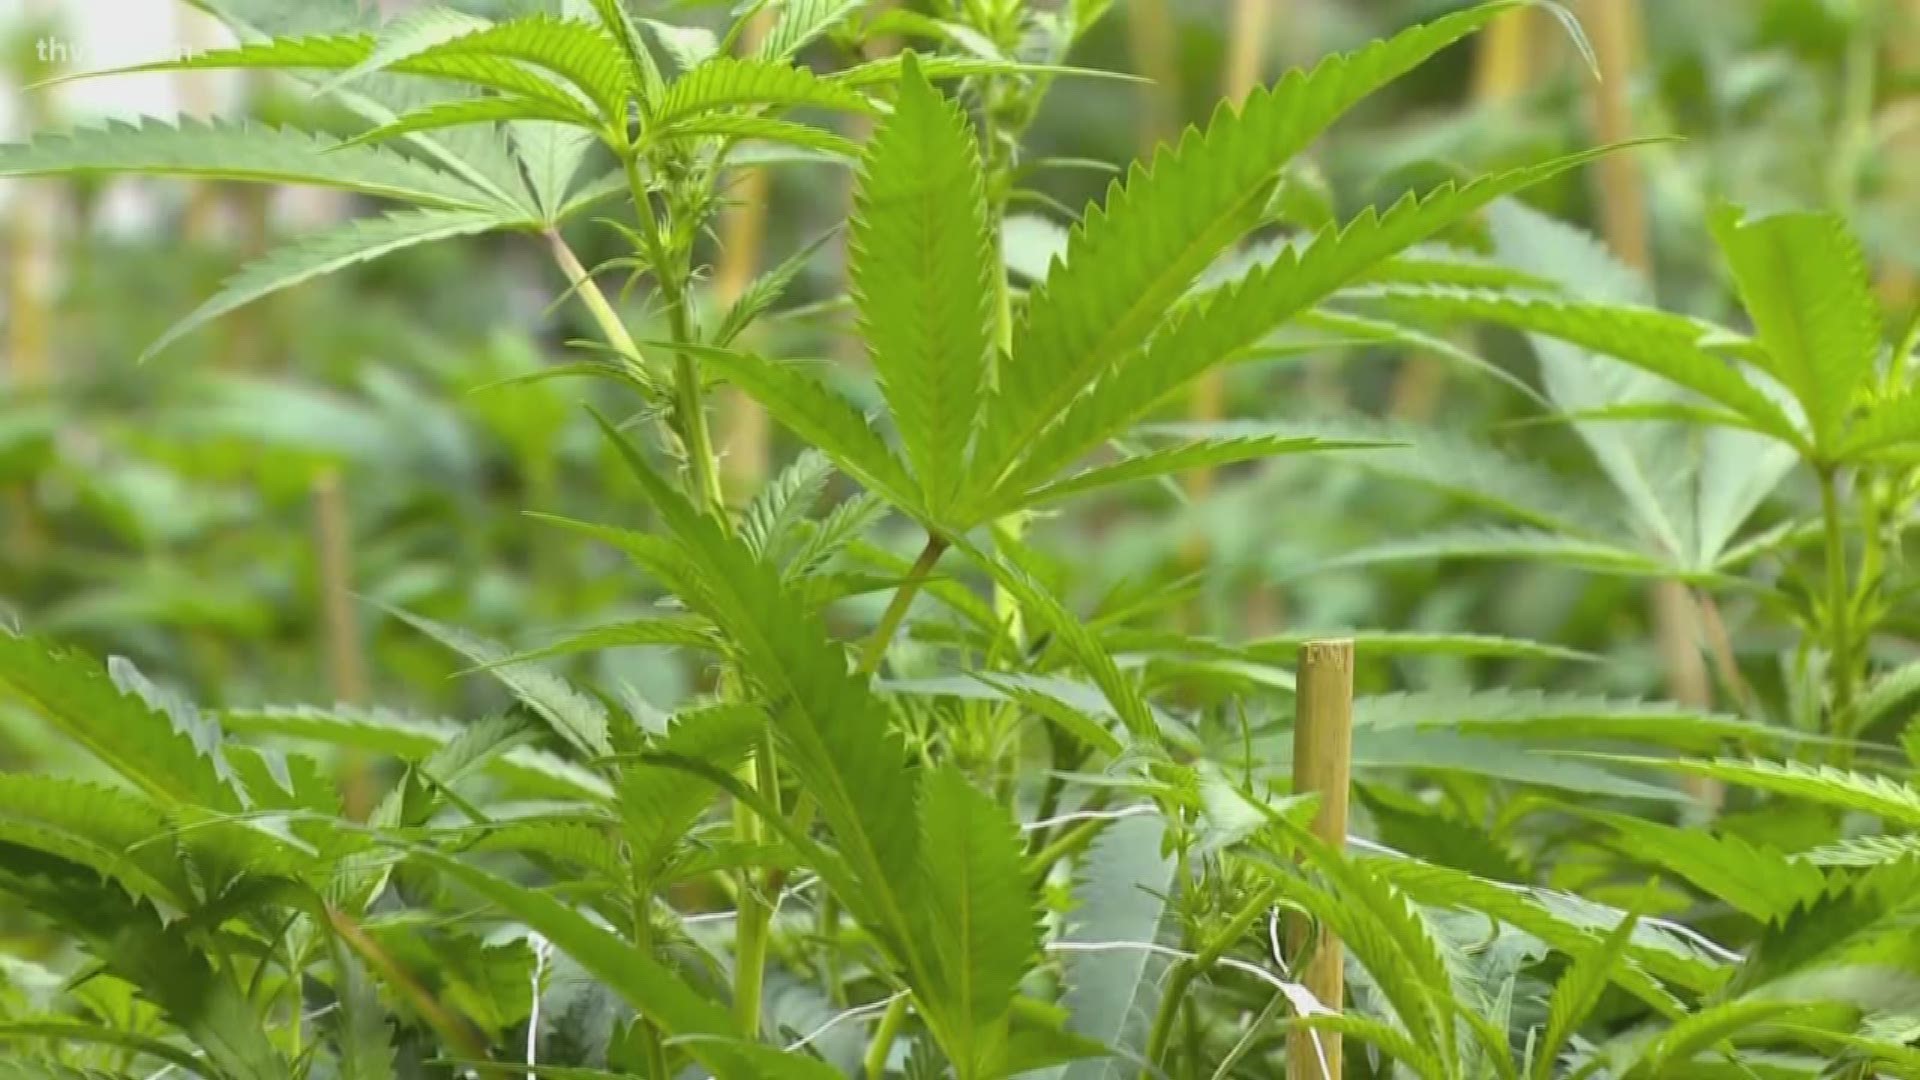 THV1's Michael Aaron gives us our first look at actual plants now growing in Arkansas.